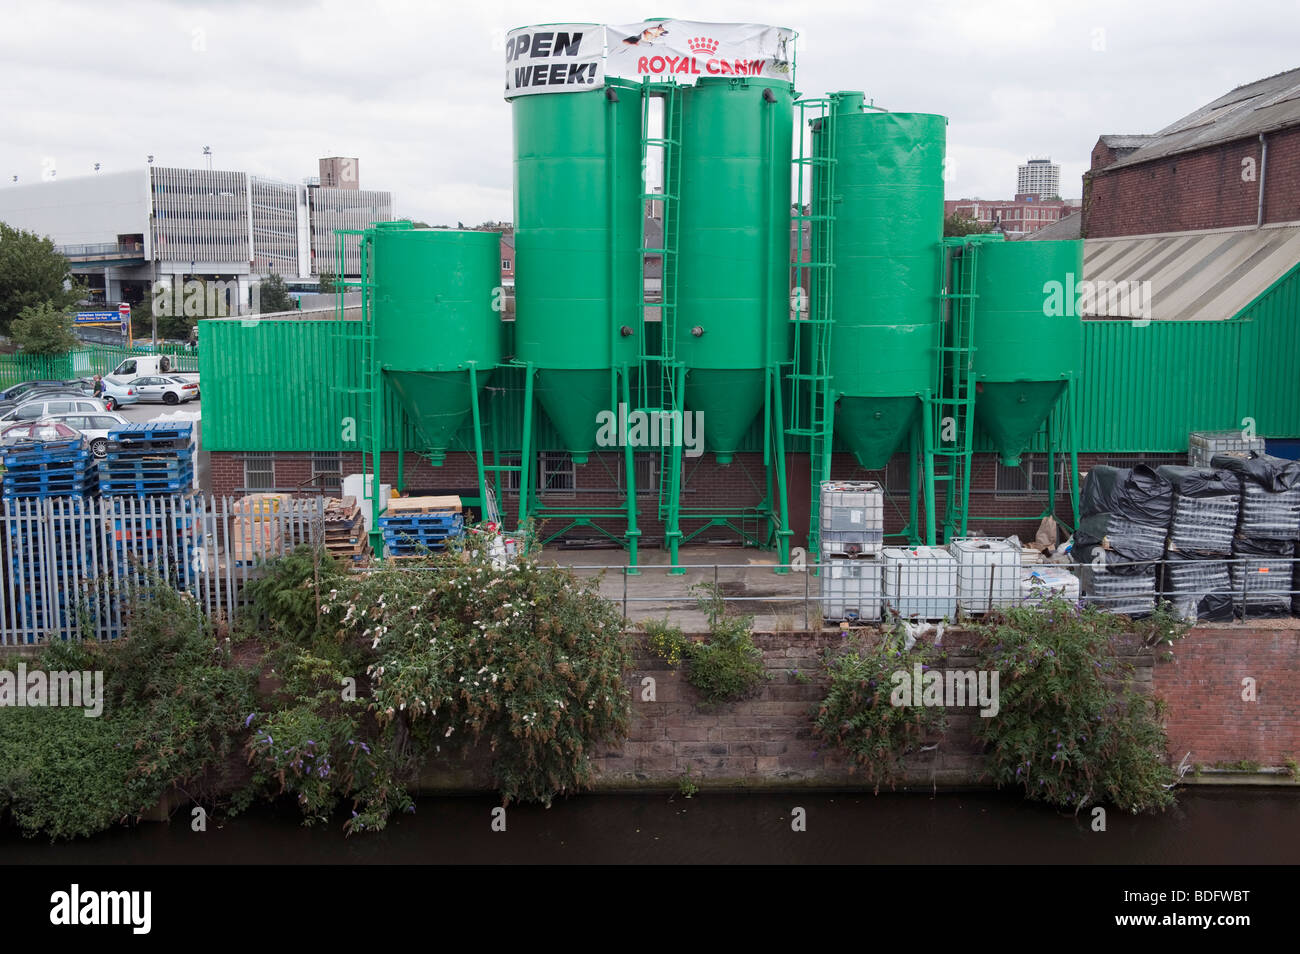 Green dry silo containers on the rear of a retail park building Stock Photo